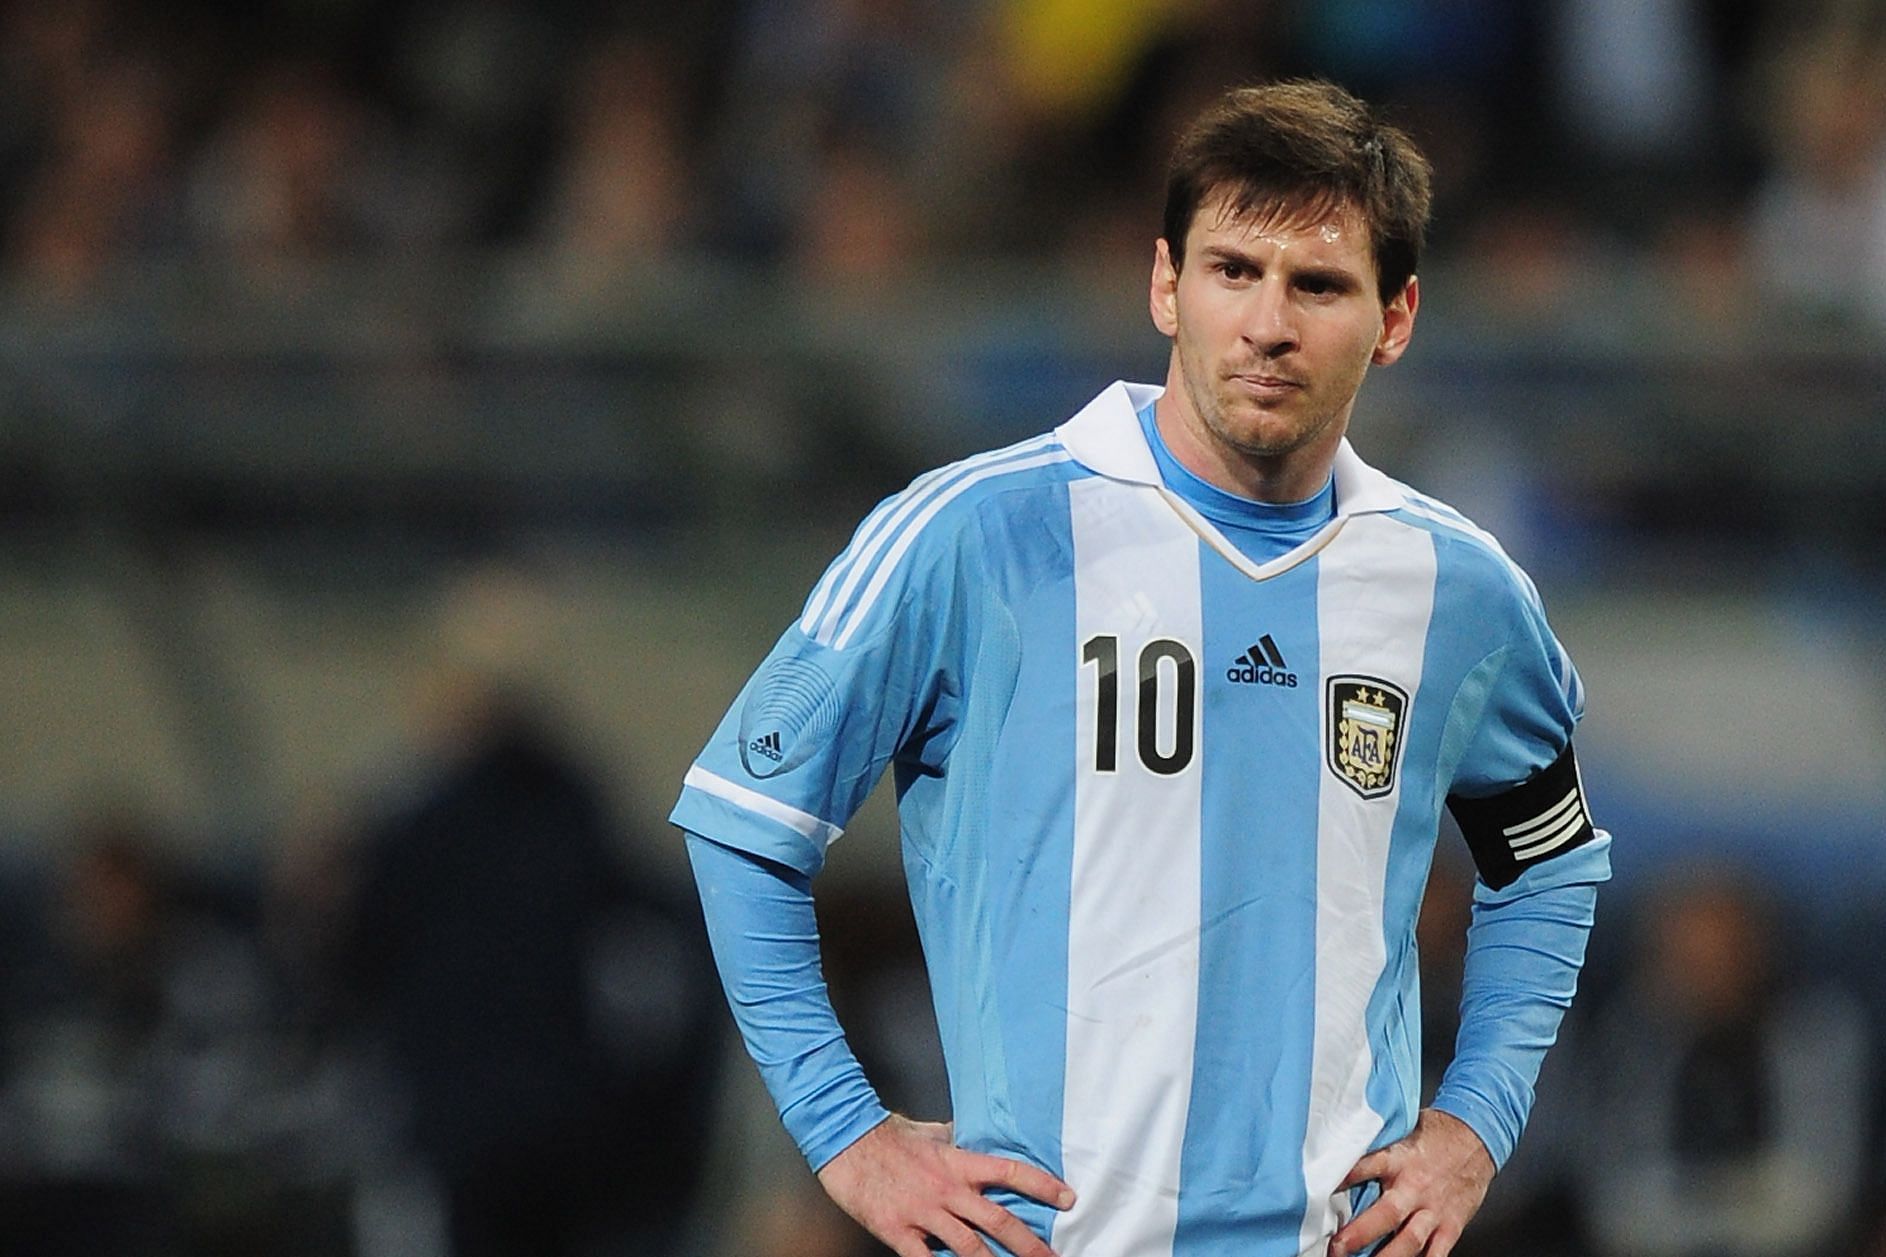 Lionel Messi had a highly productive 2013 with Argentina